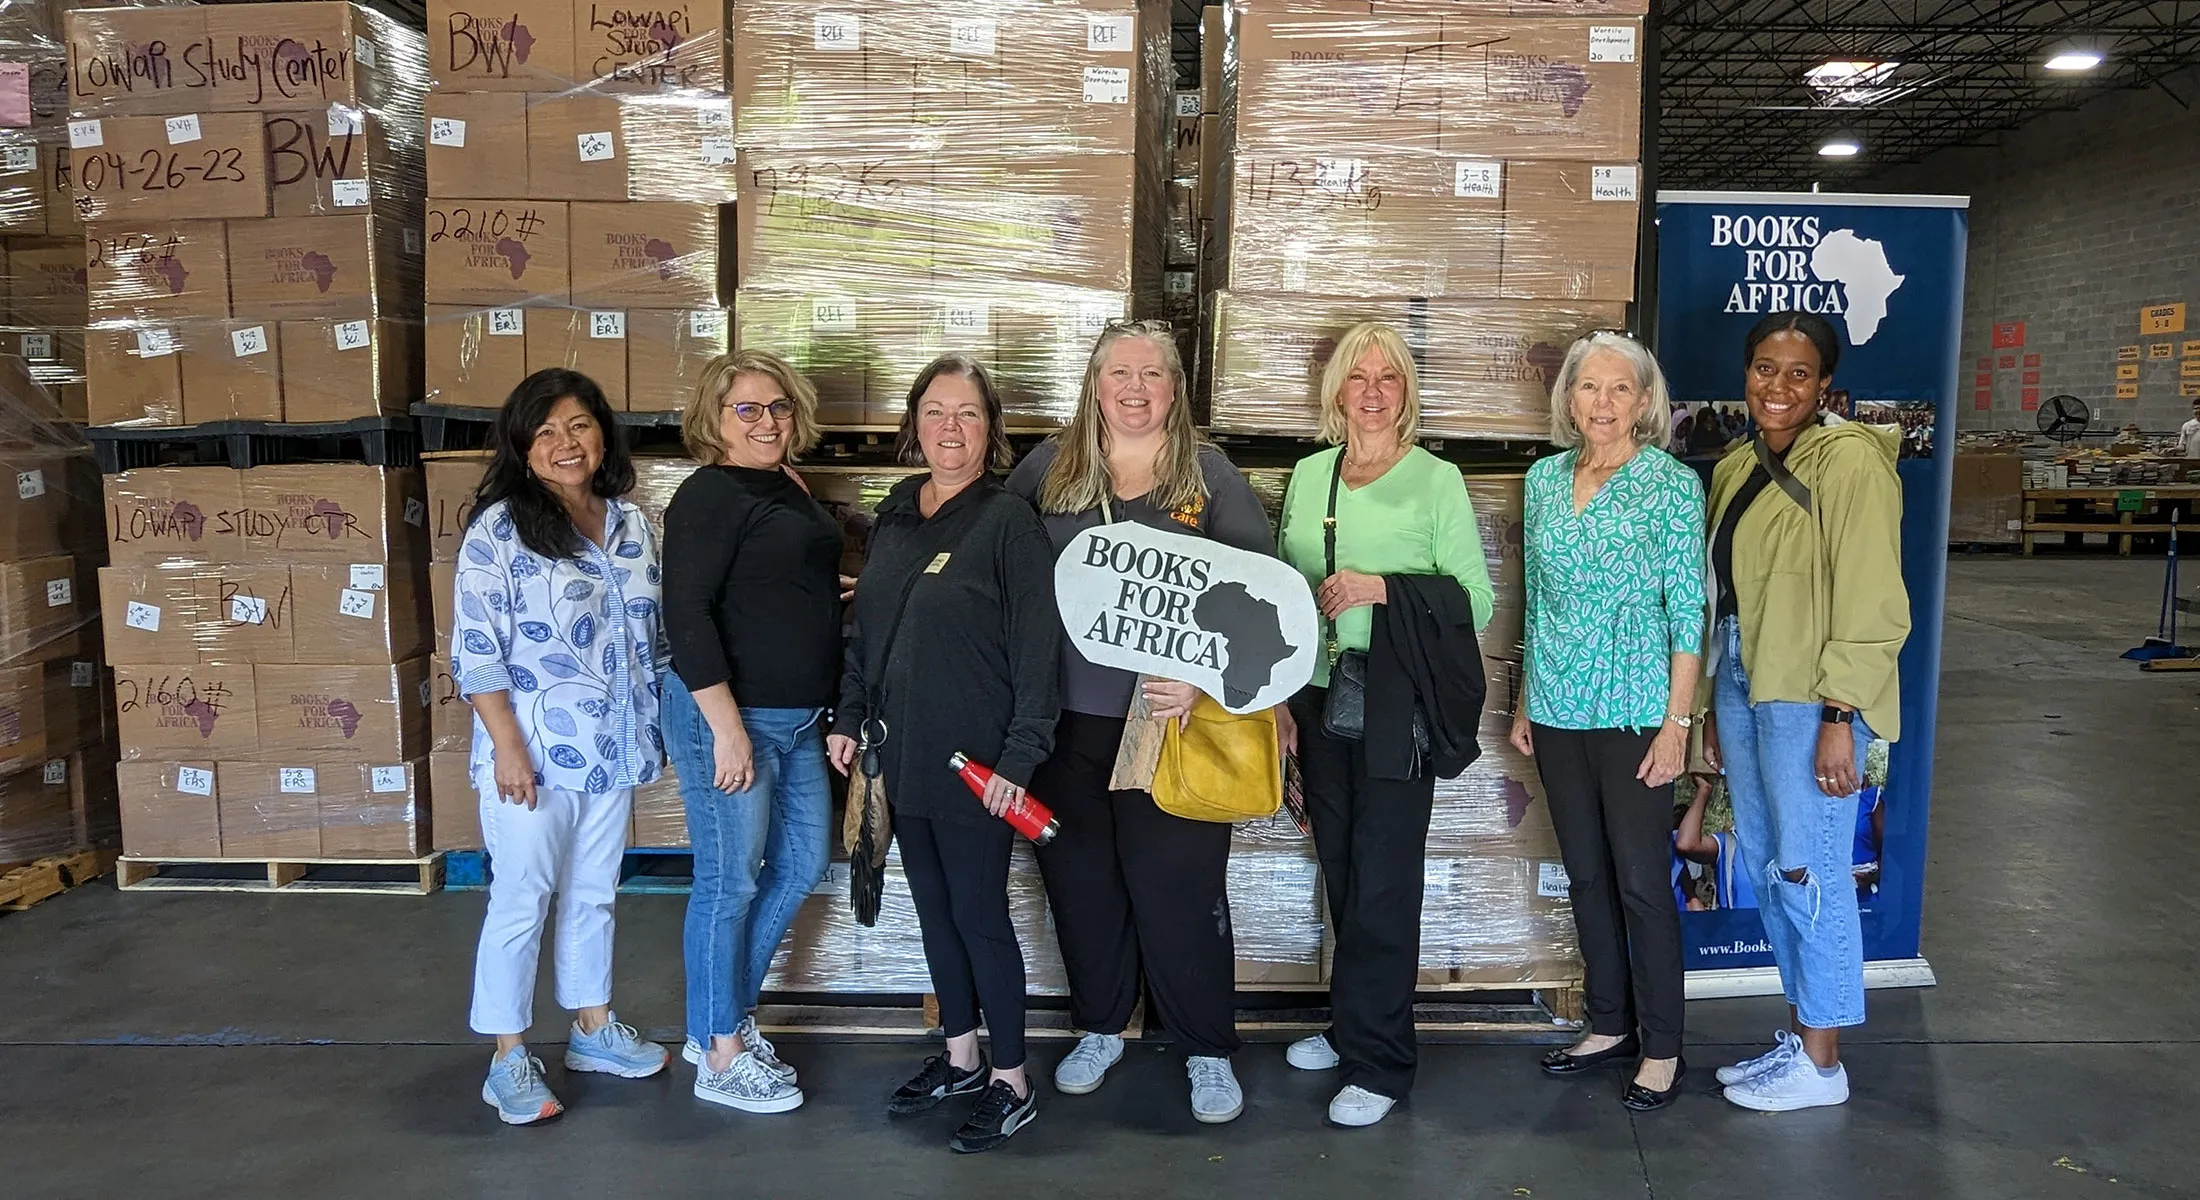 CARE staff and network members posing in front of large stacks of books to be donated abroad.